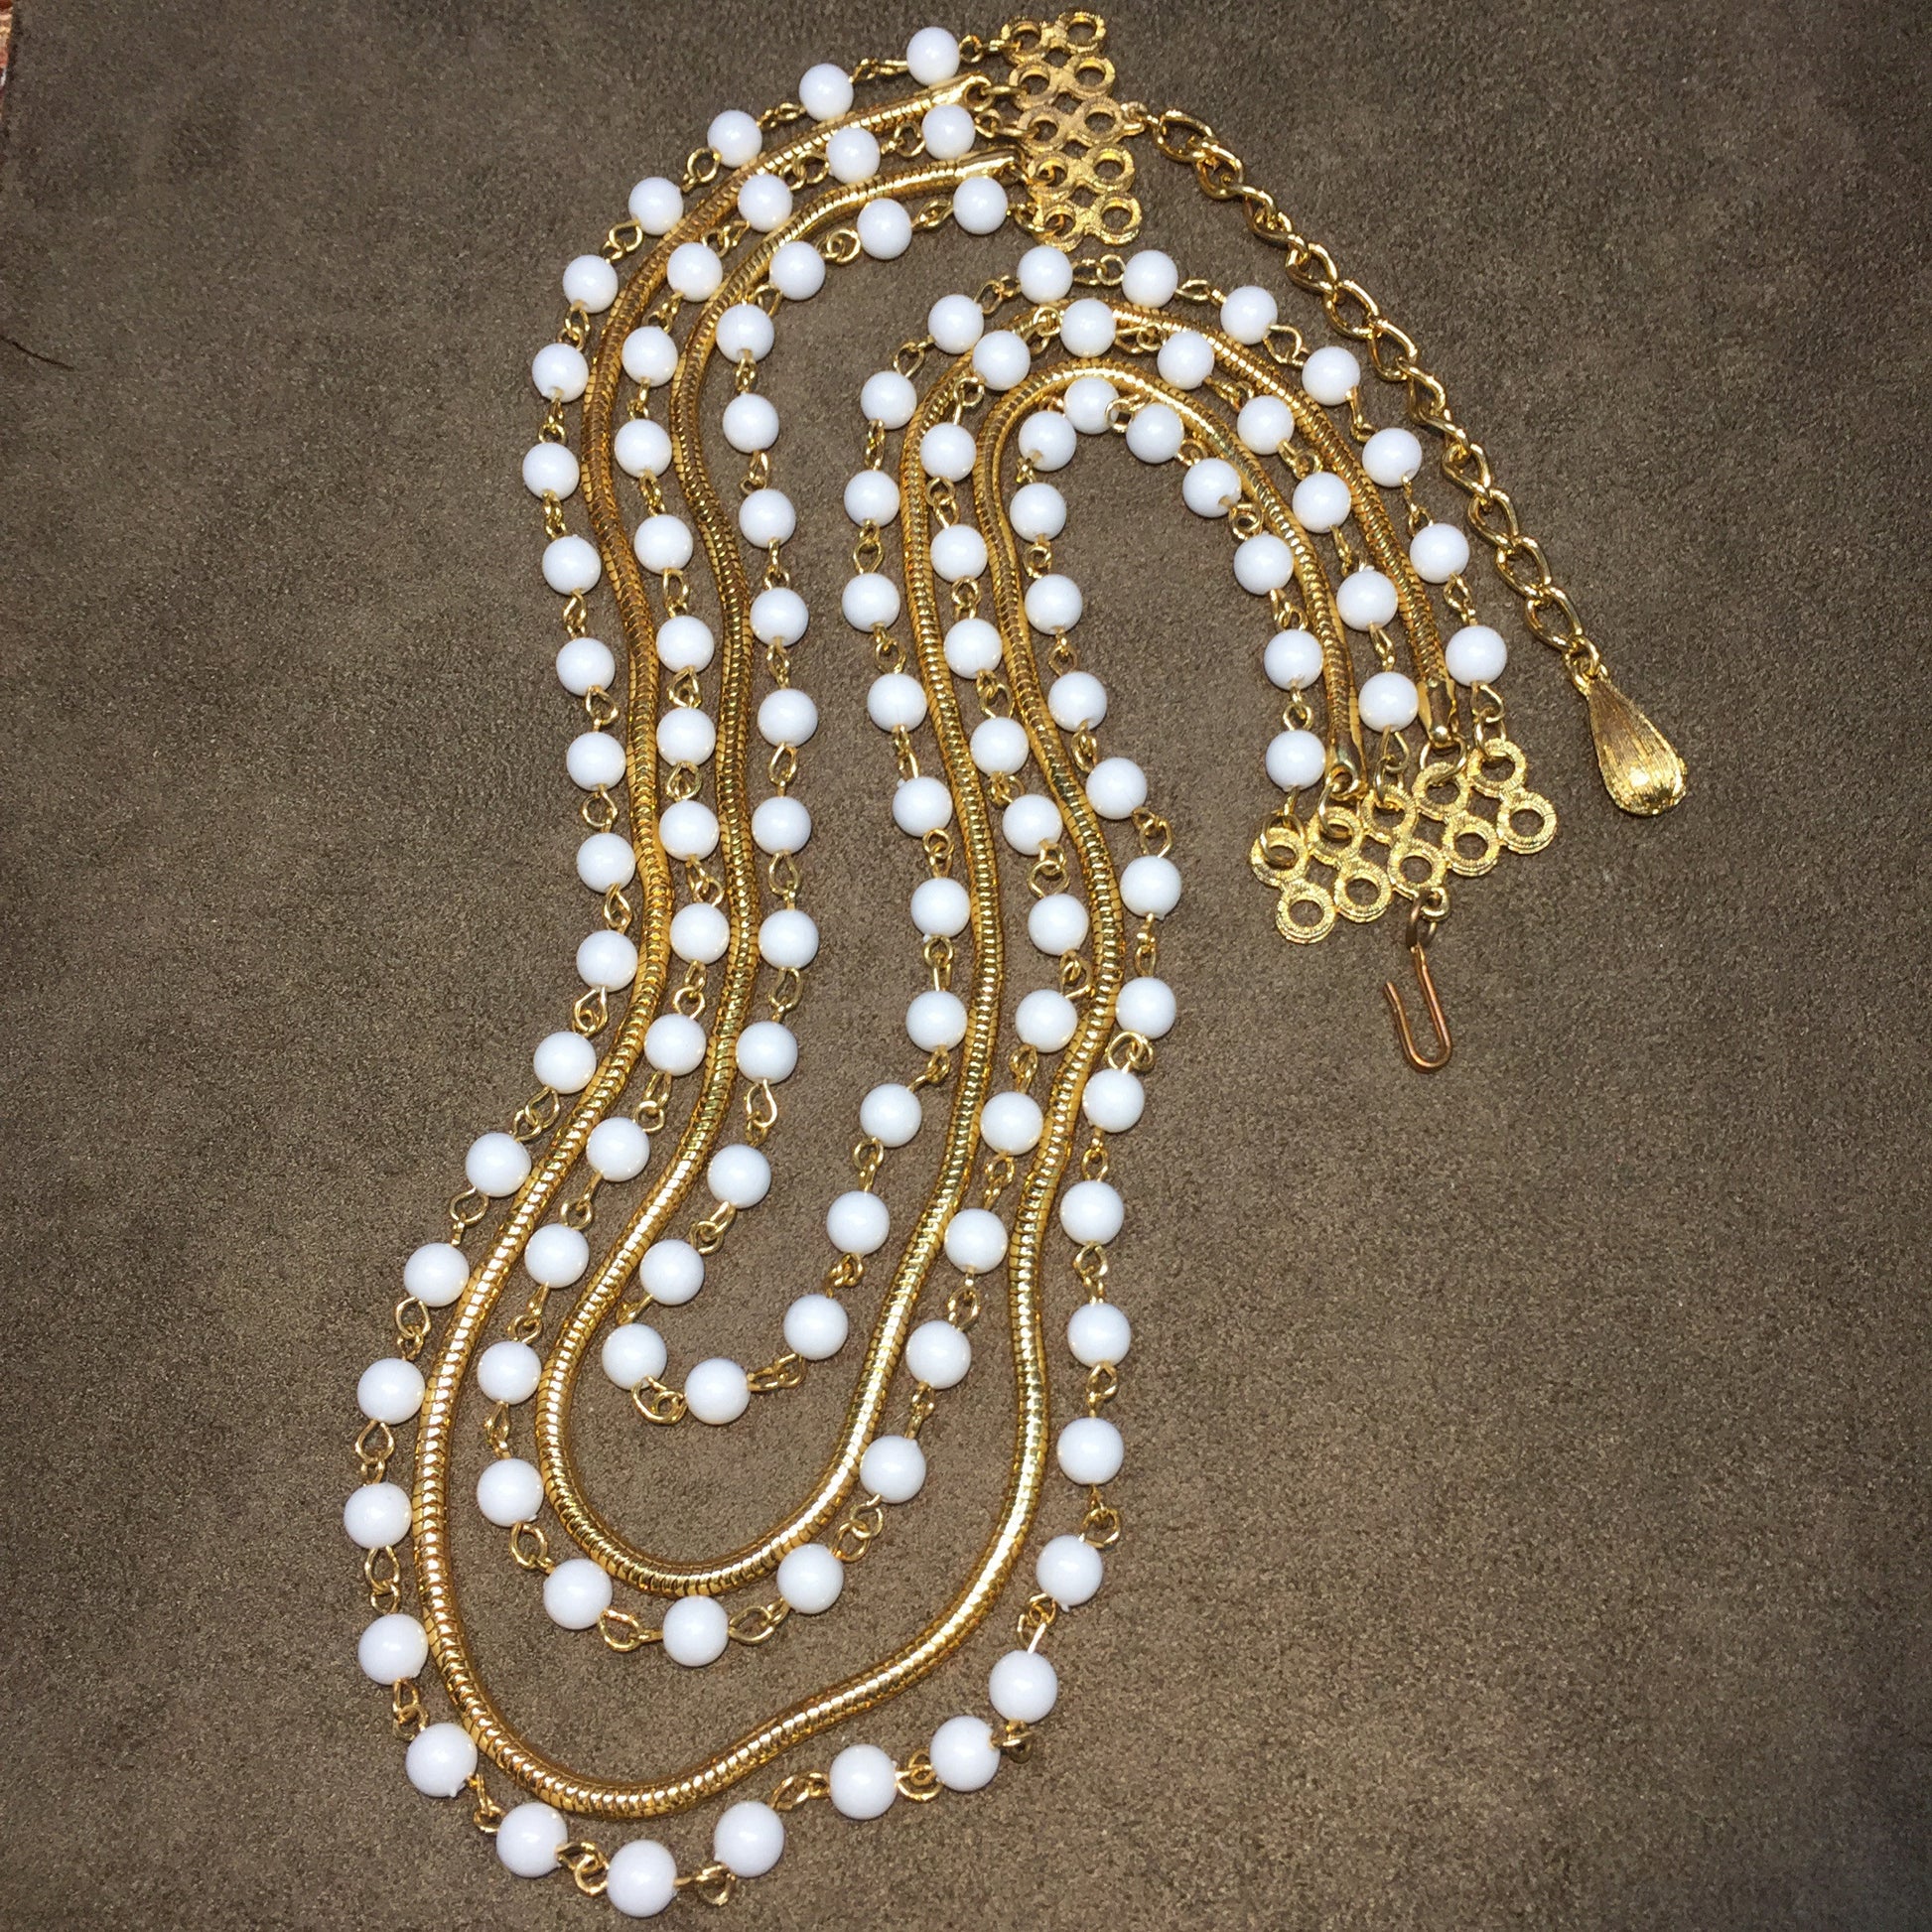 Vintage Layered Five Strand White & Goldtone Necklace - Lady Slippers